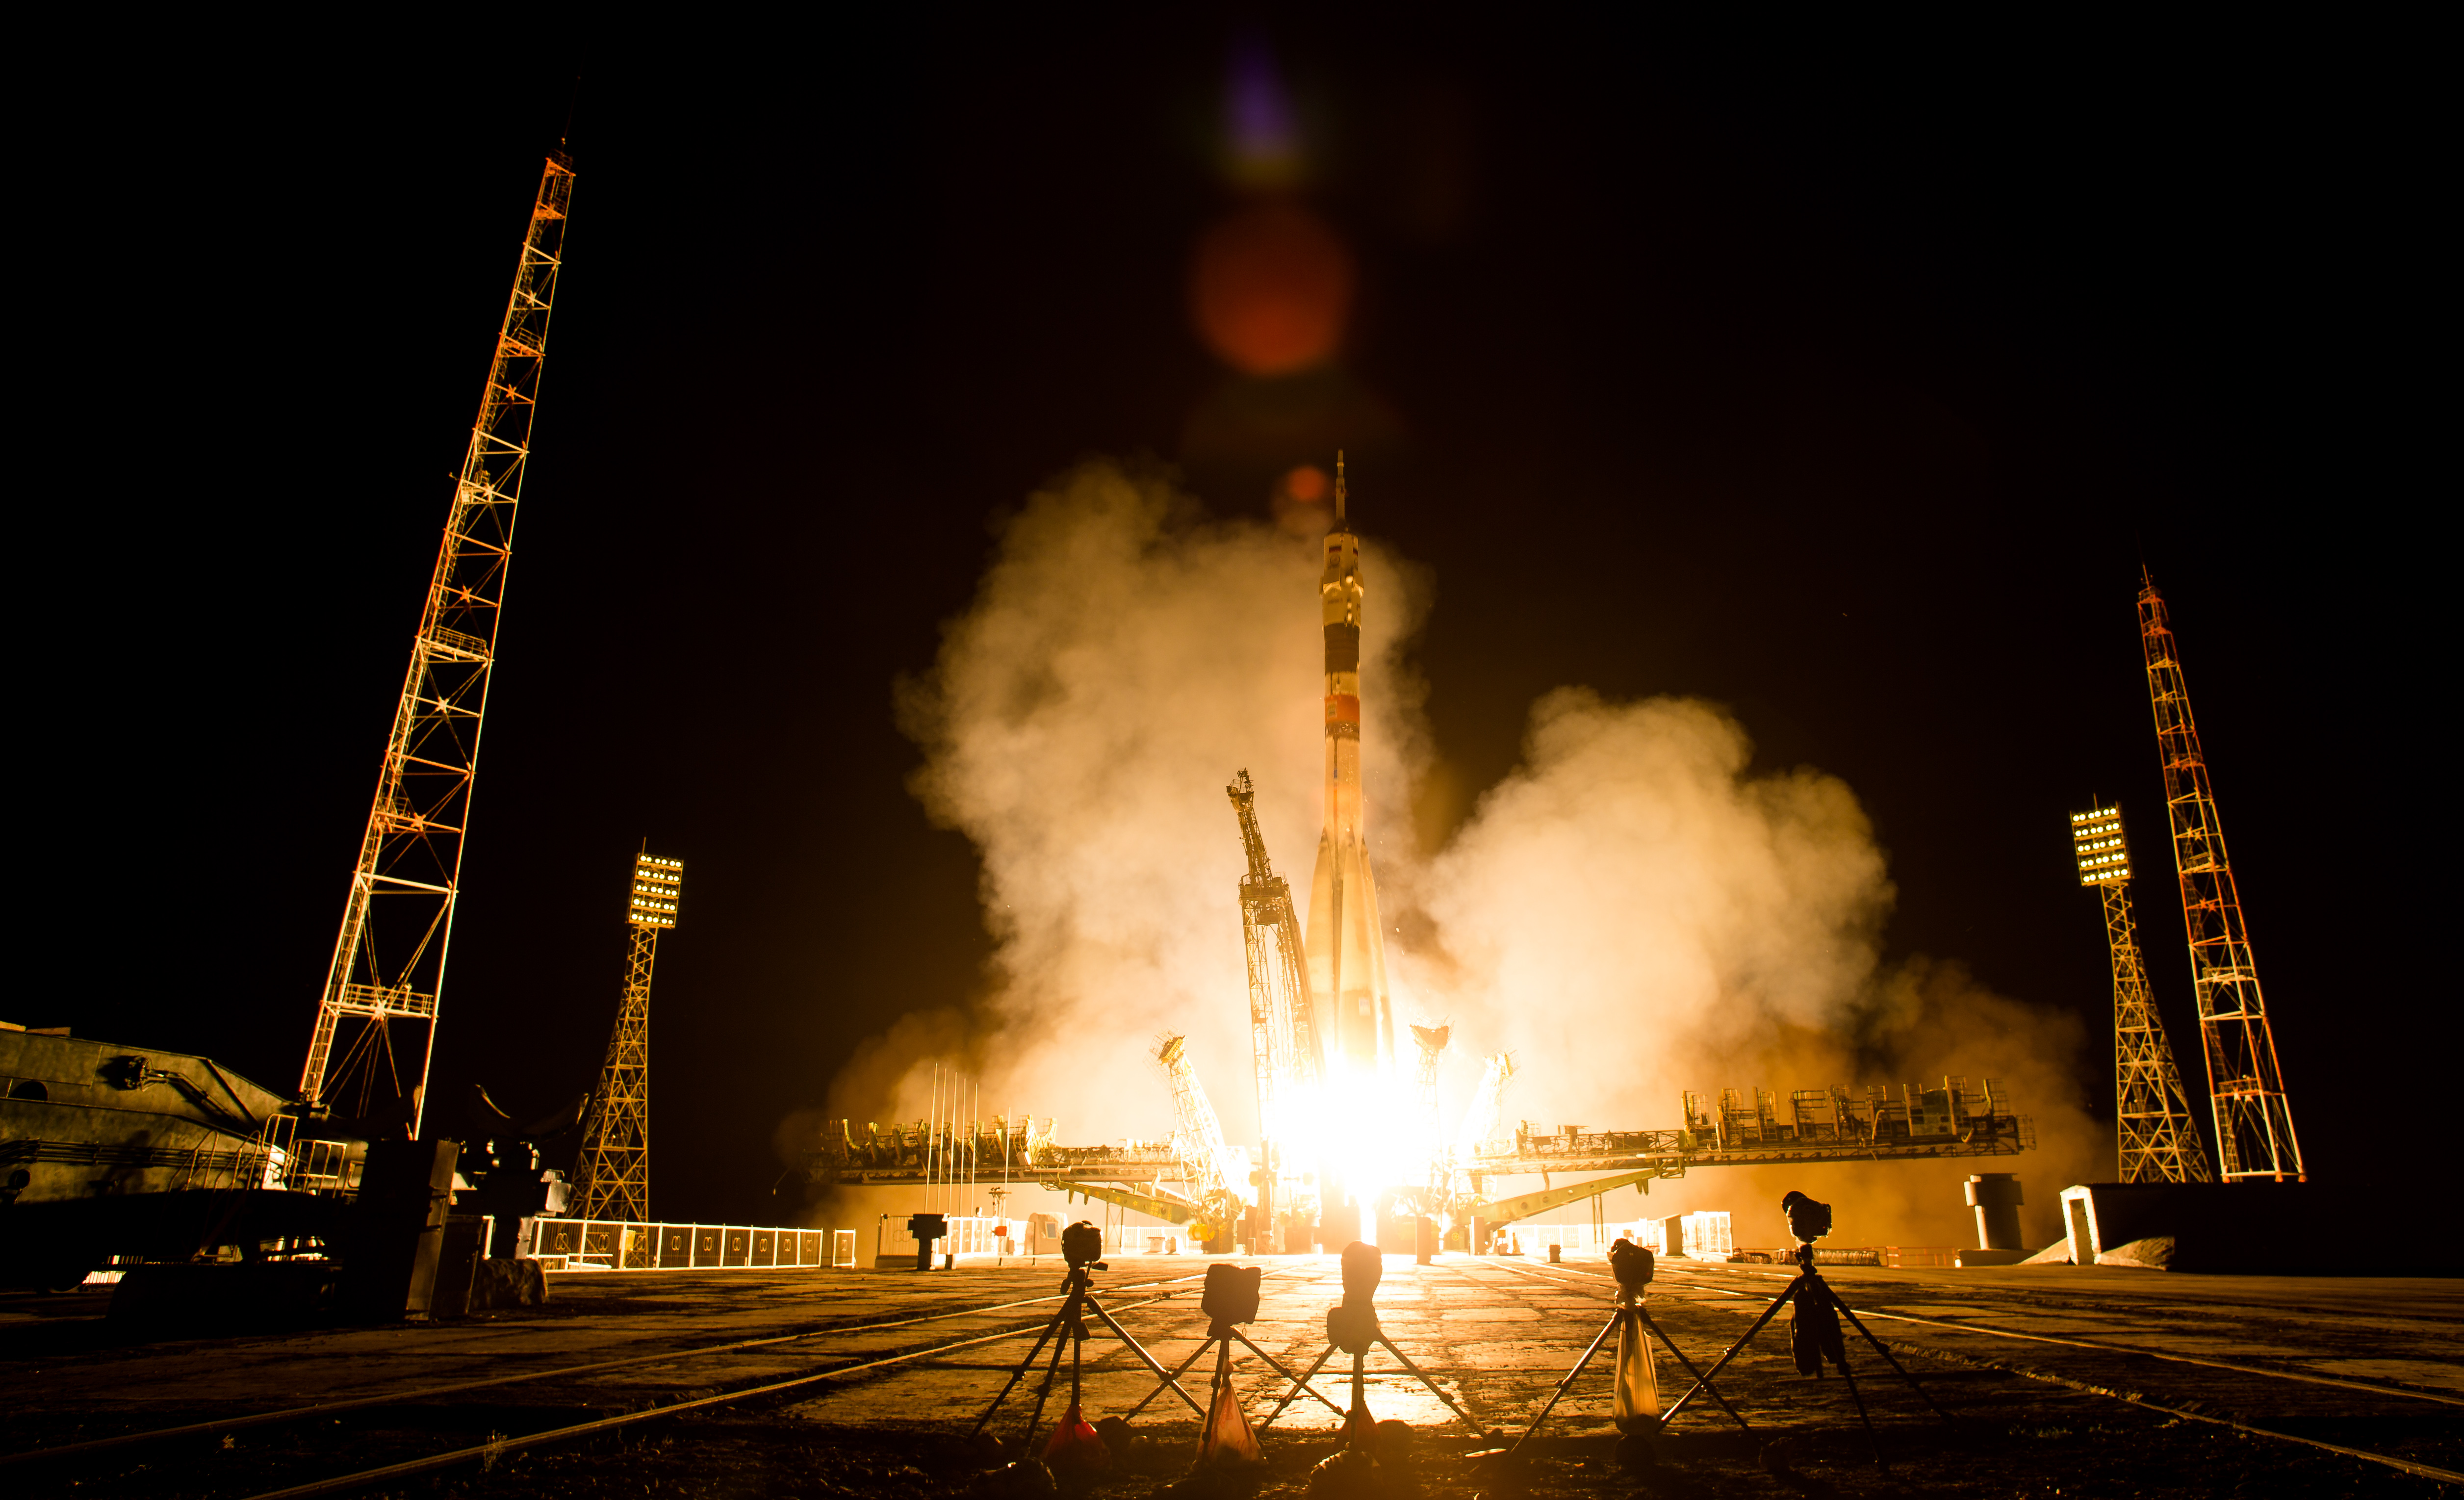 The Soyuz TMA-13M rocket is launched with three astronauts inside on May 29, 2014 at the Baikonur Cosmodrome in Kazakhstan.